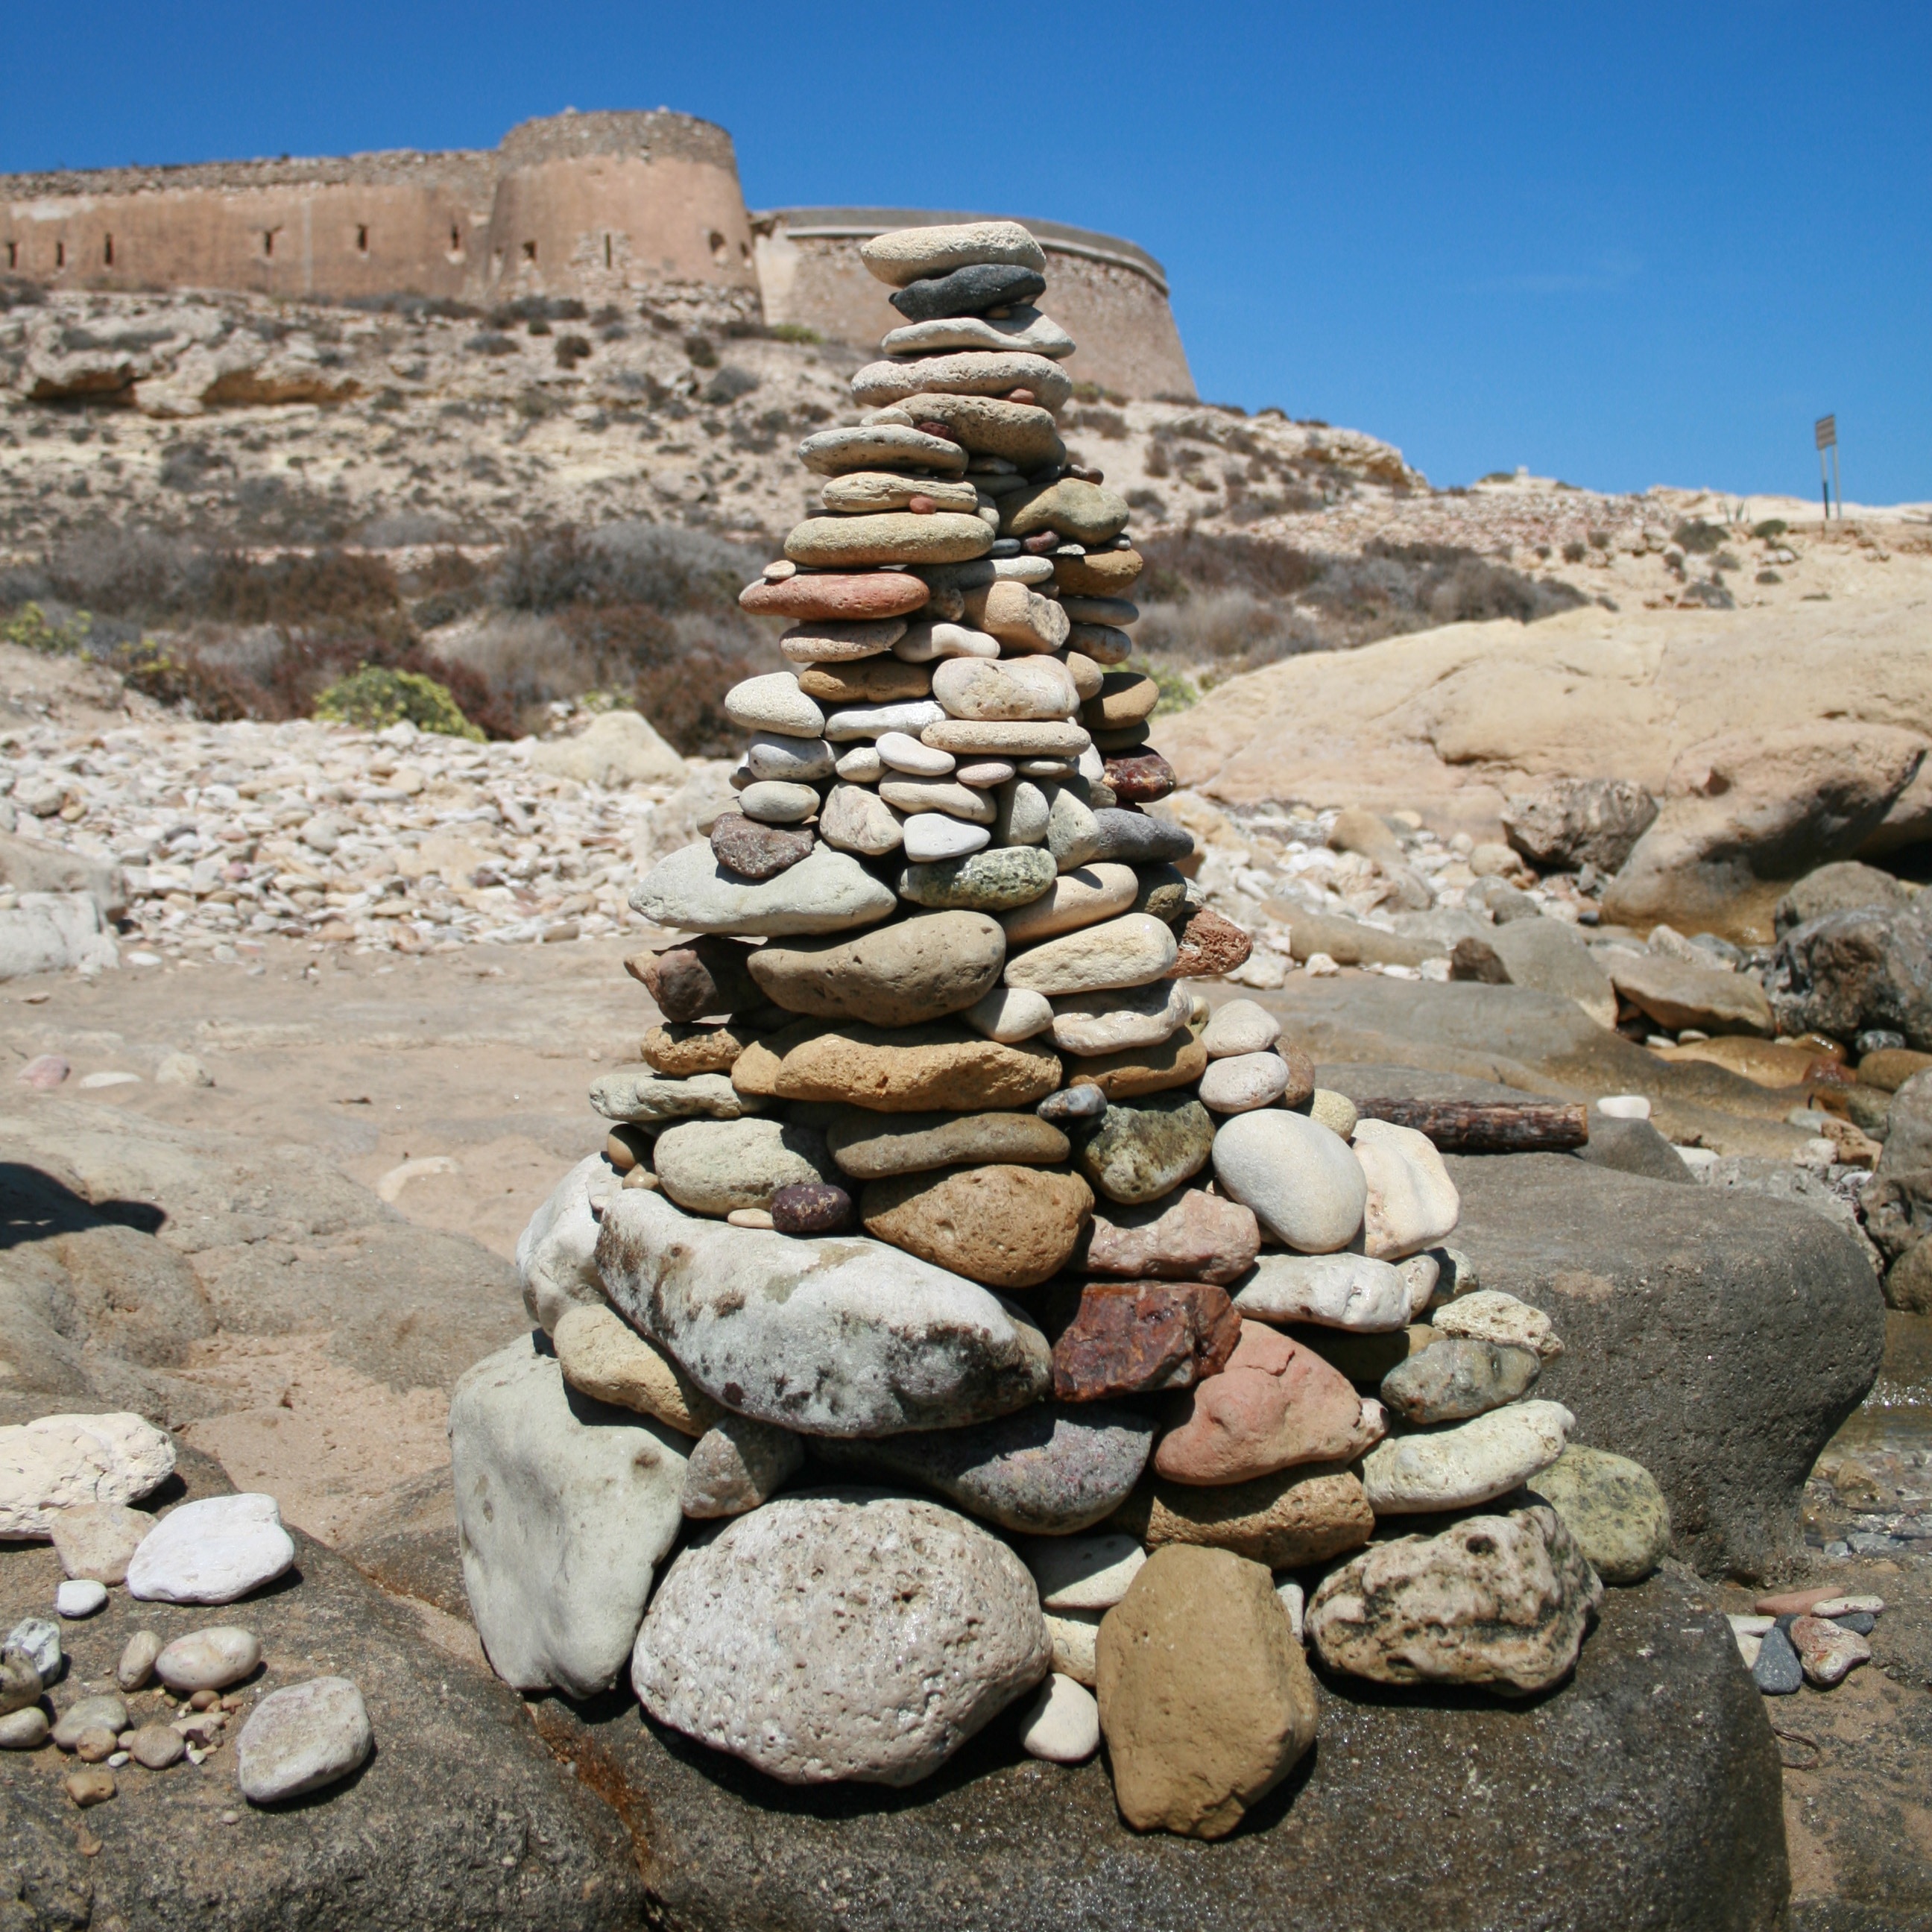 pebbles arranged as tower on gray rock during daytime